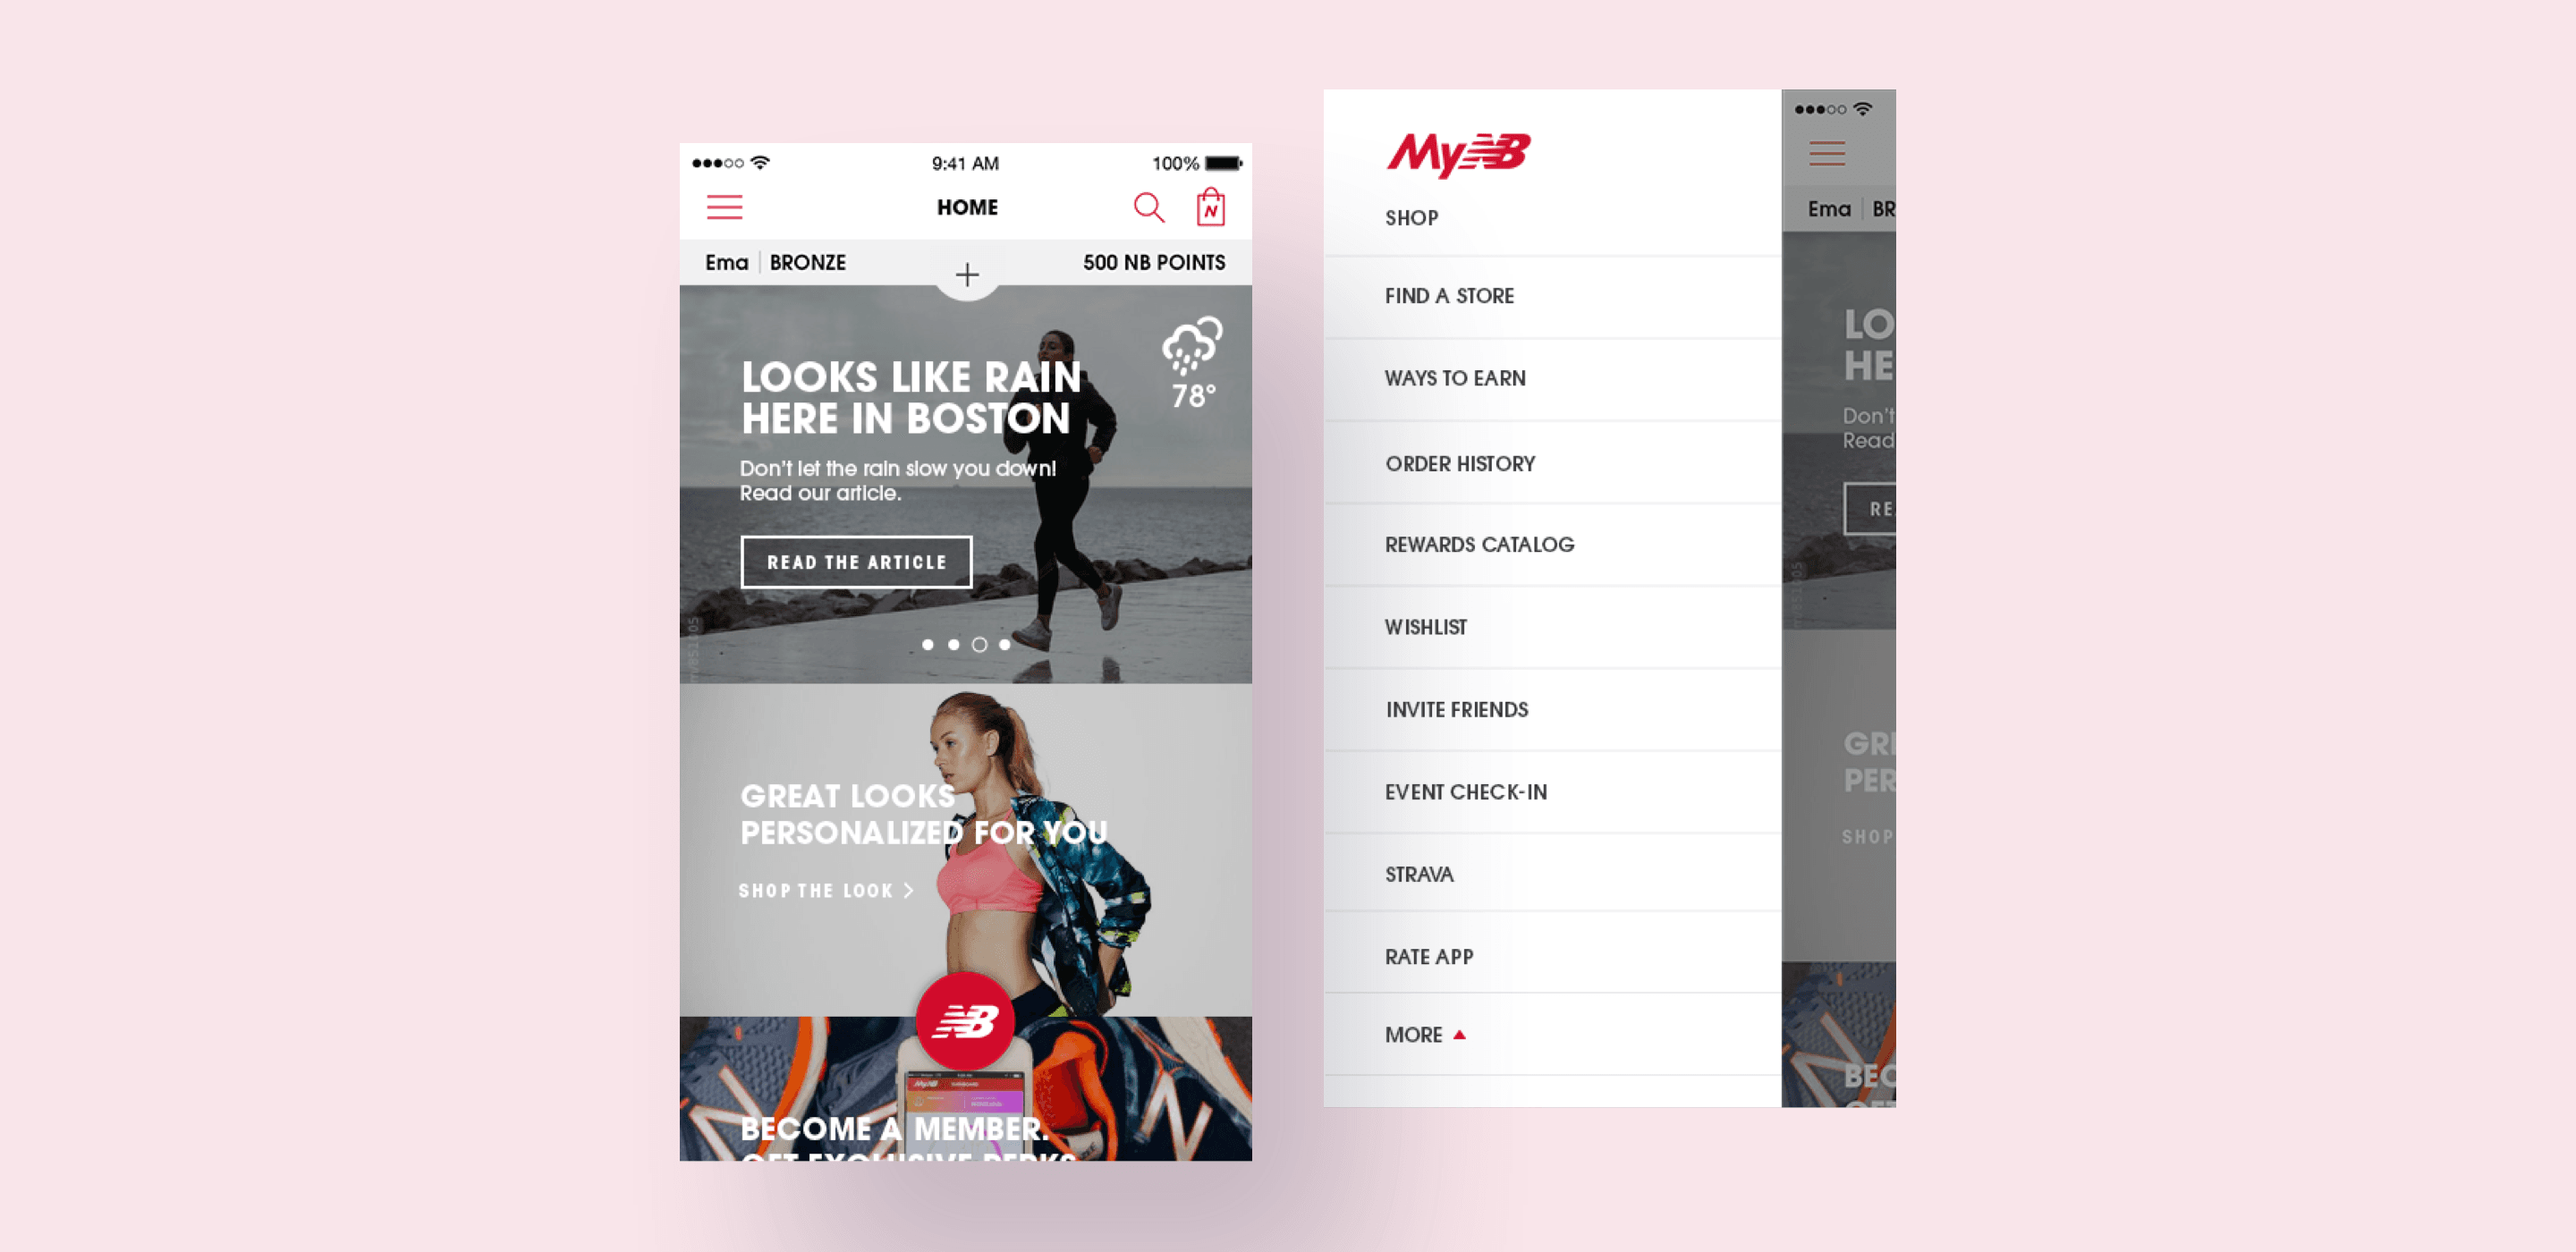 New Balance app screenshots featuring a data-driven homepage and a personalized menu.